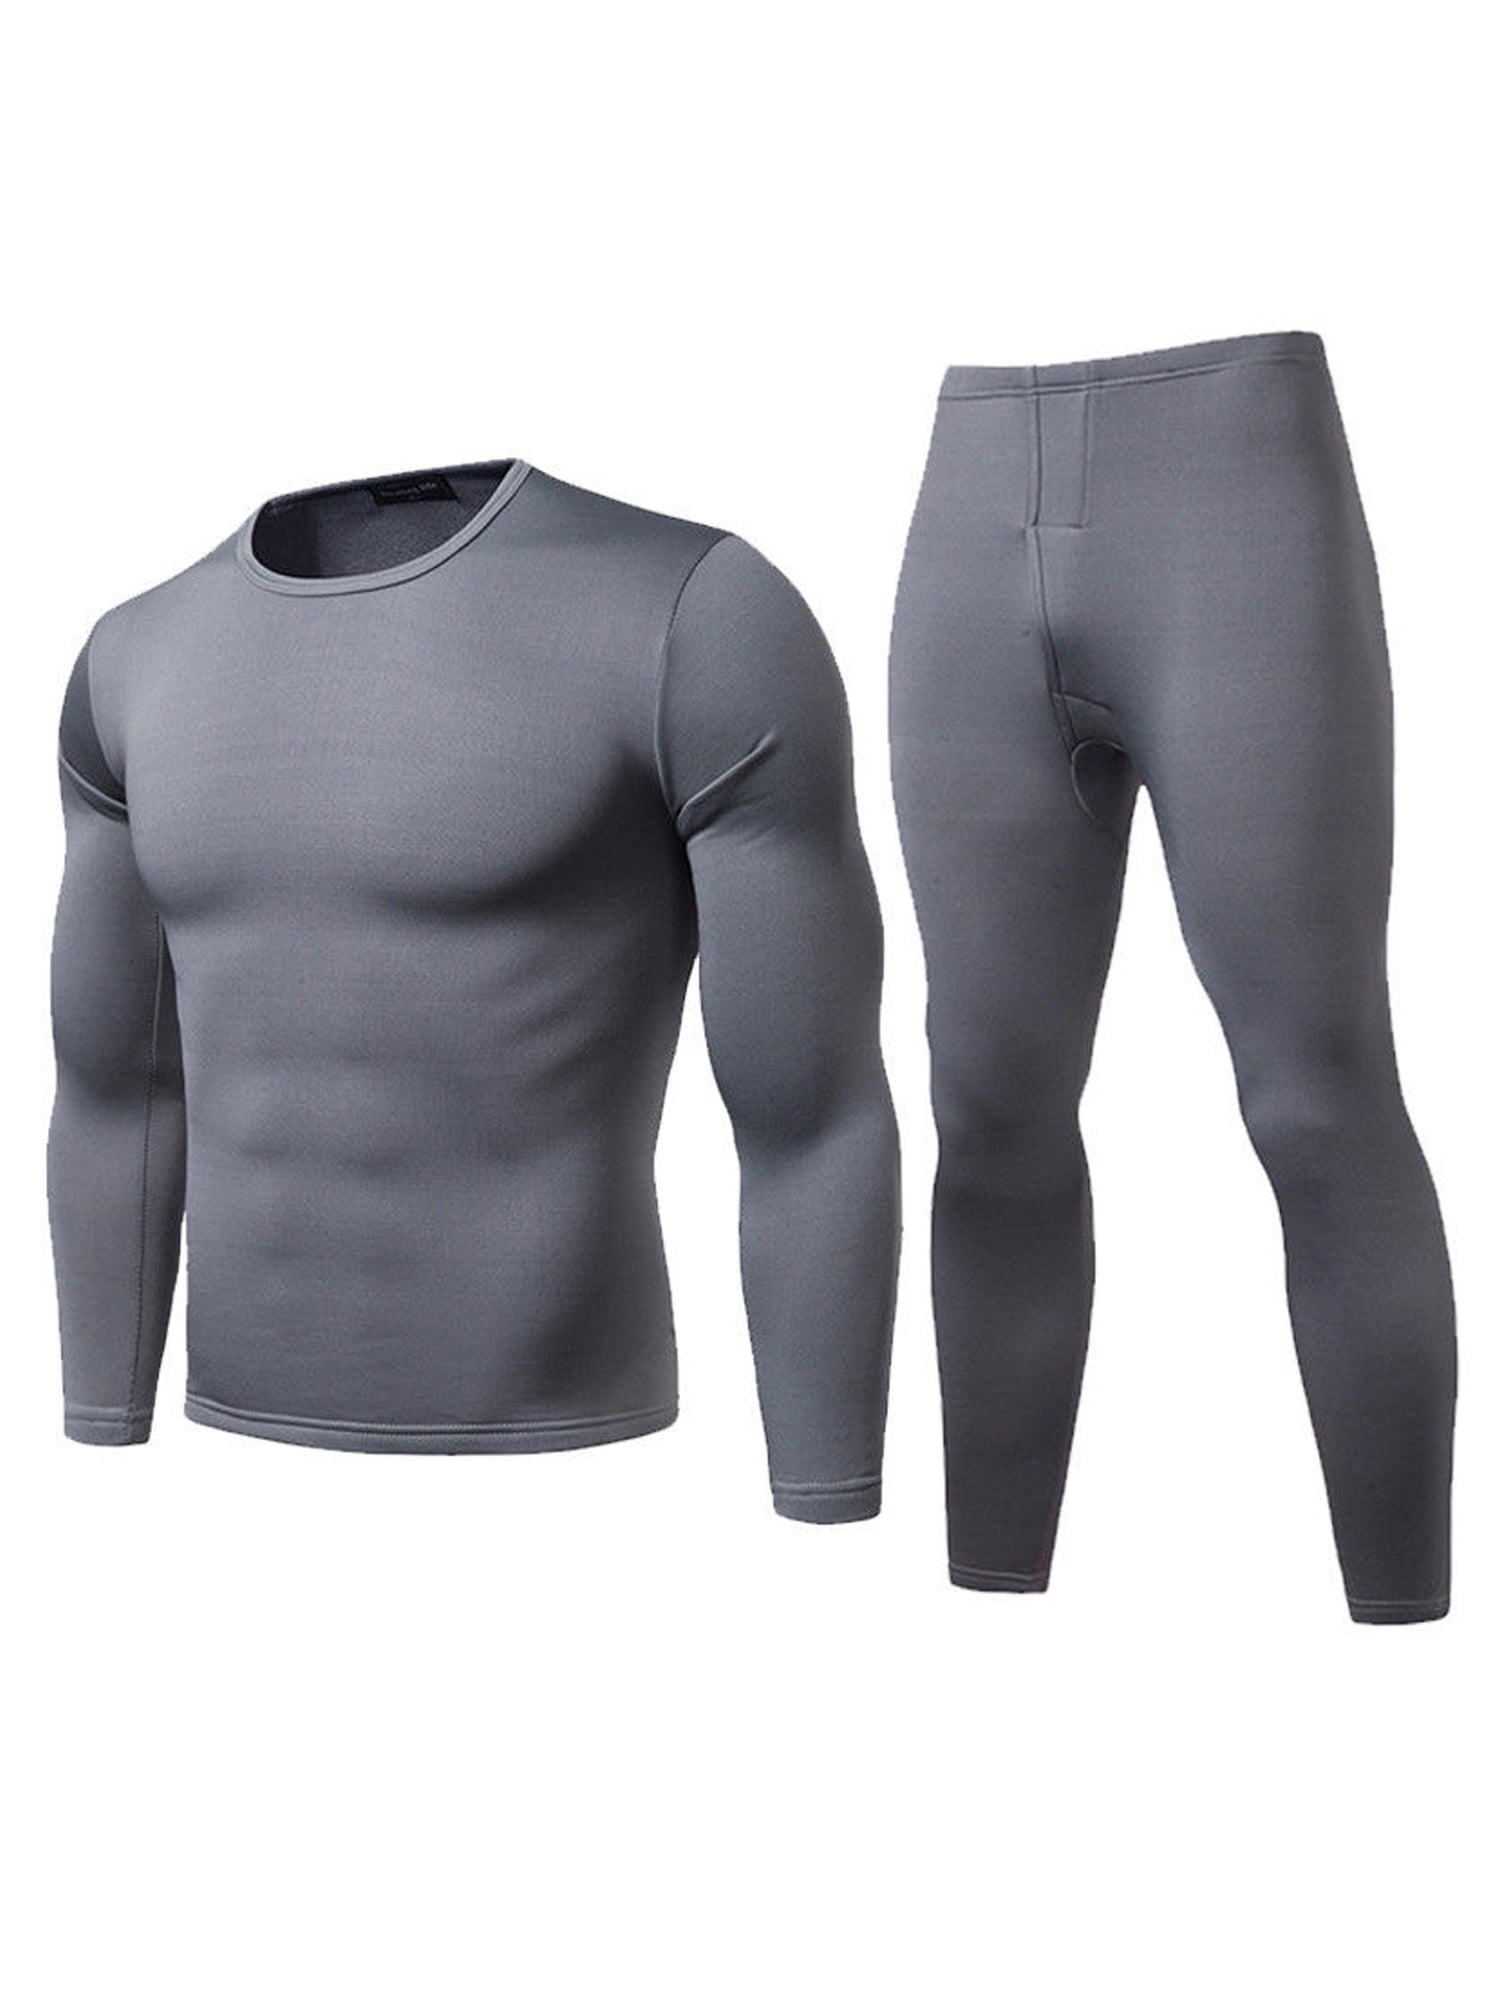 Mens Thermal Underwear Undergarment Long Johns Bottoms 2 pack skiing outdoors